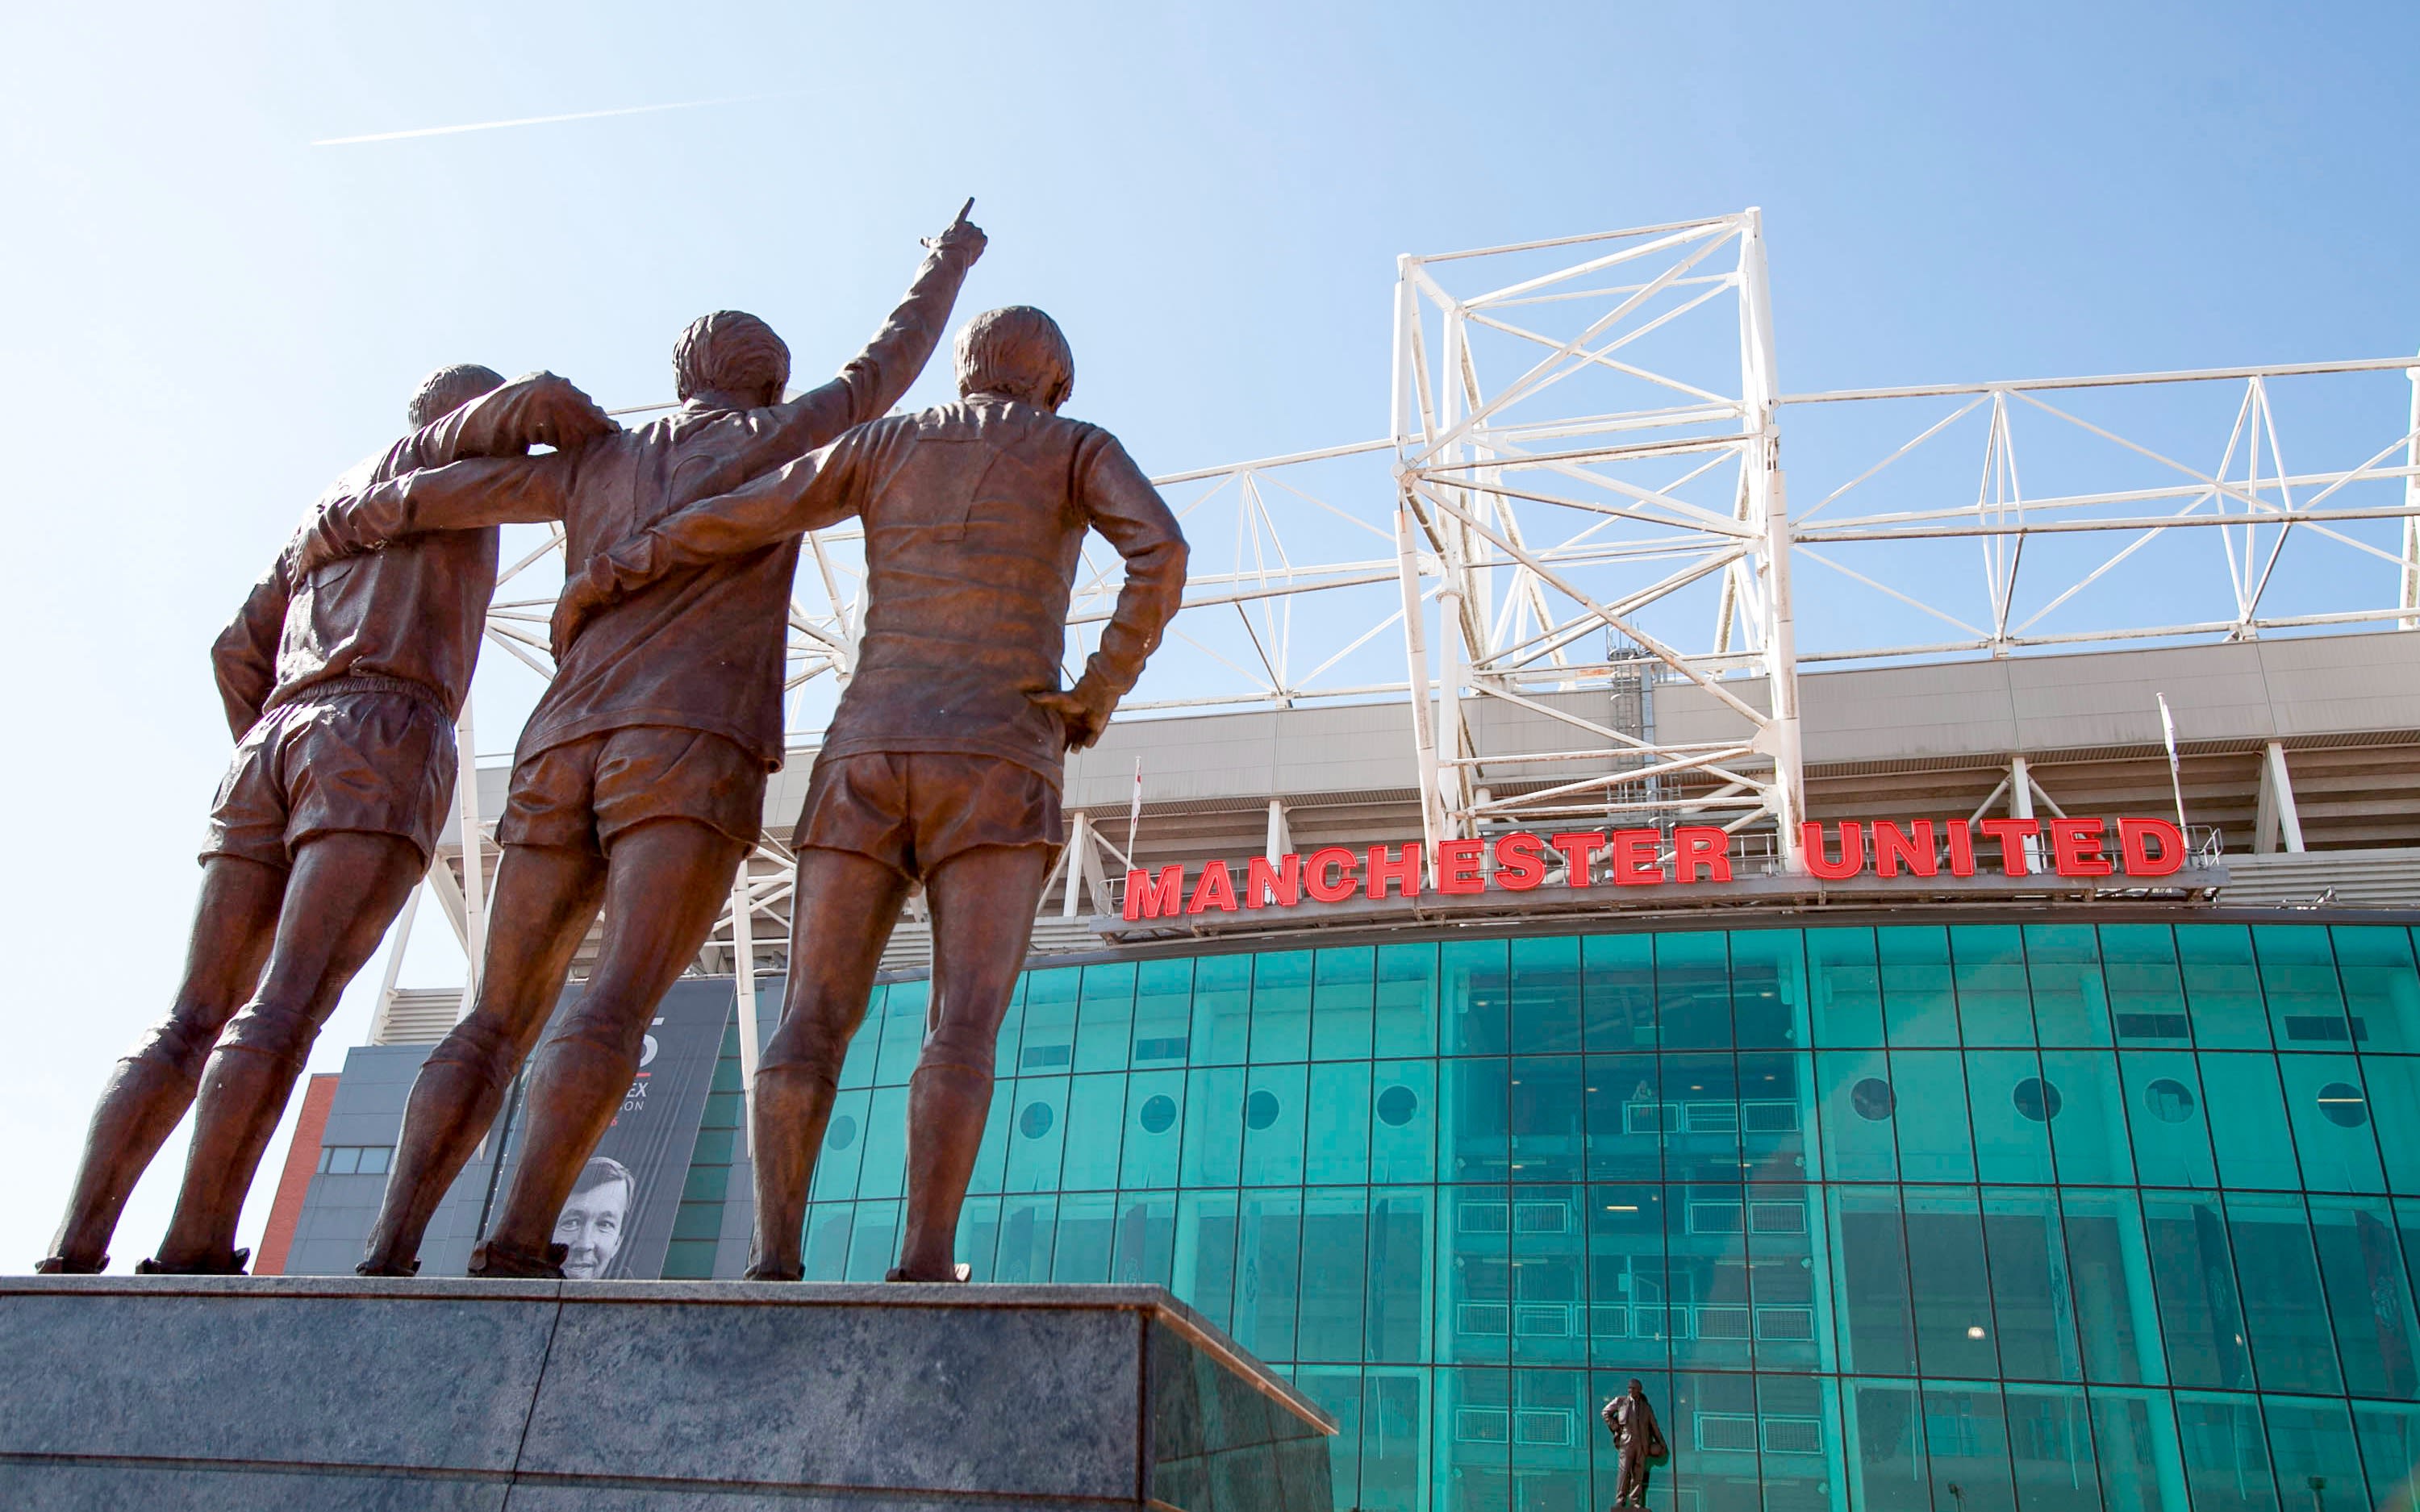 The statue of three people outside Old Trafford stadium in Manchester